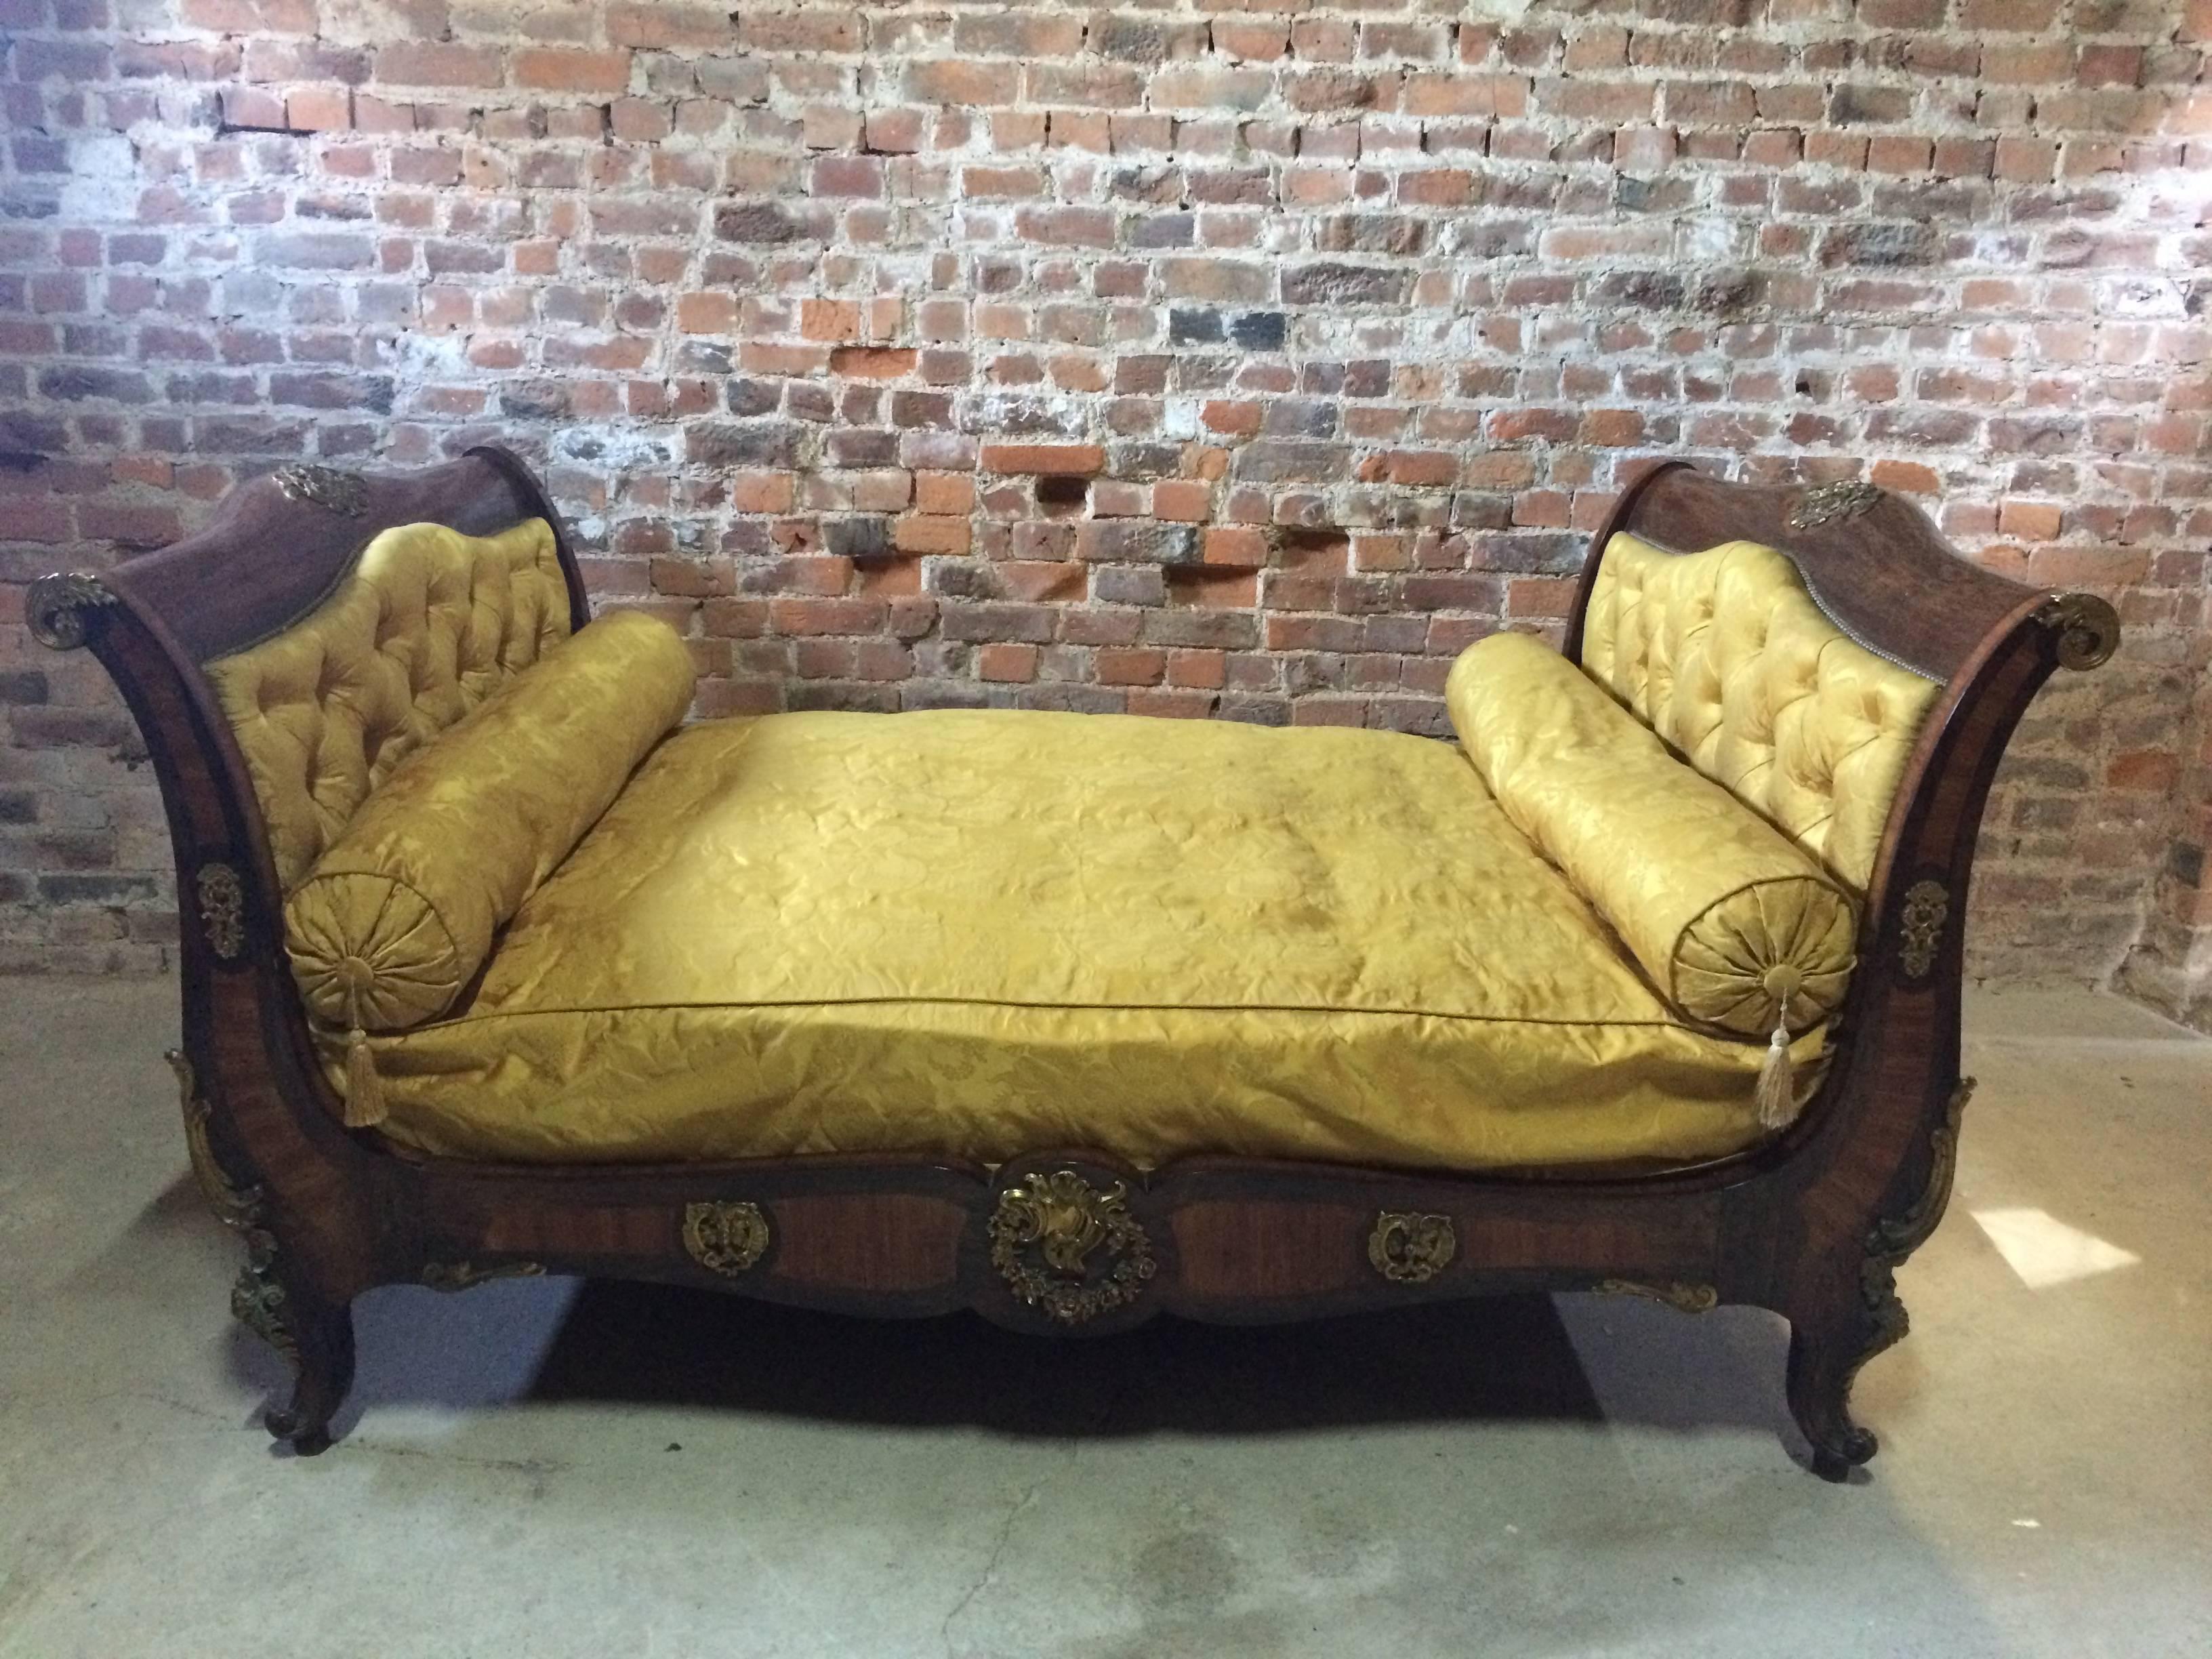 Antique Daybed Bed Lit en Bateau French Louis XV Style 19th Century, circa 1815 2